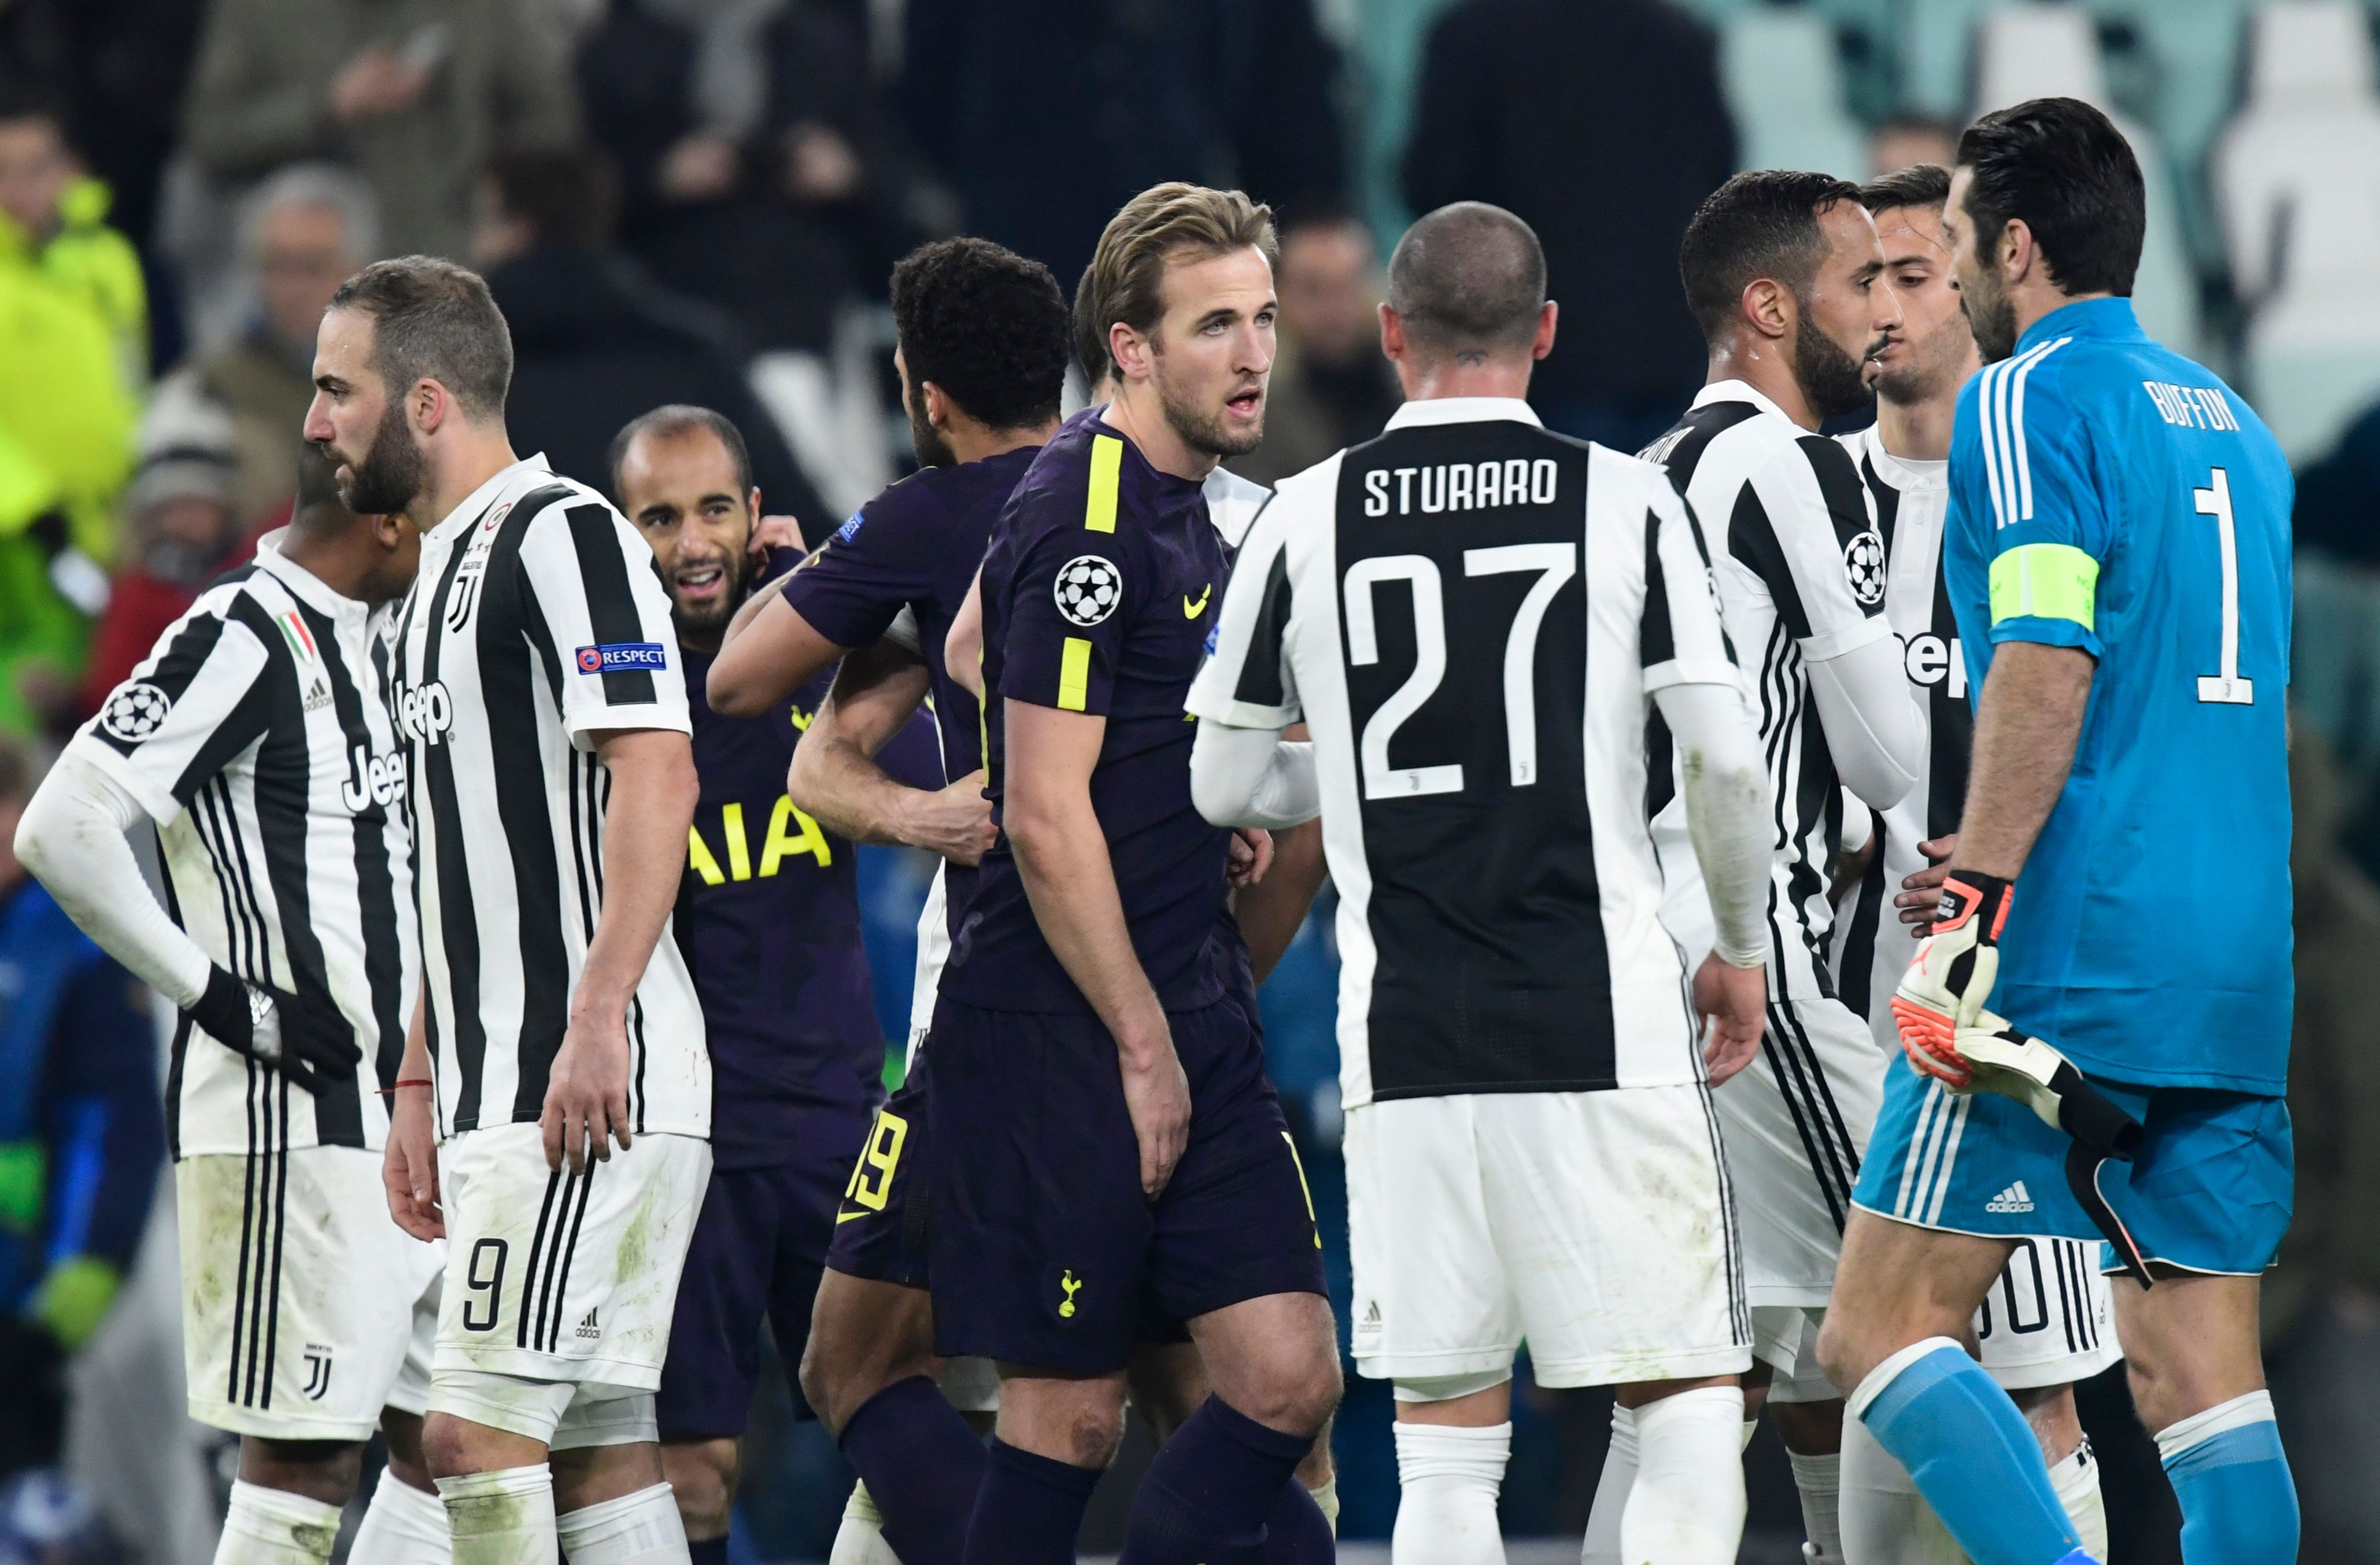 Tottenham Hotspur's English striker Harry Kane (C) looks on after the UEFA Champions League round of sixteen first leg football match between Juventus and Tottenham Hotspur at The Allianz Stadium in Turin on February 13, 2018.  / AFP PHOTO / Miguel MEDINA        (Photo credit should read MIGUEL MEDINA/AFP/Getty Images)